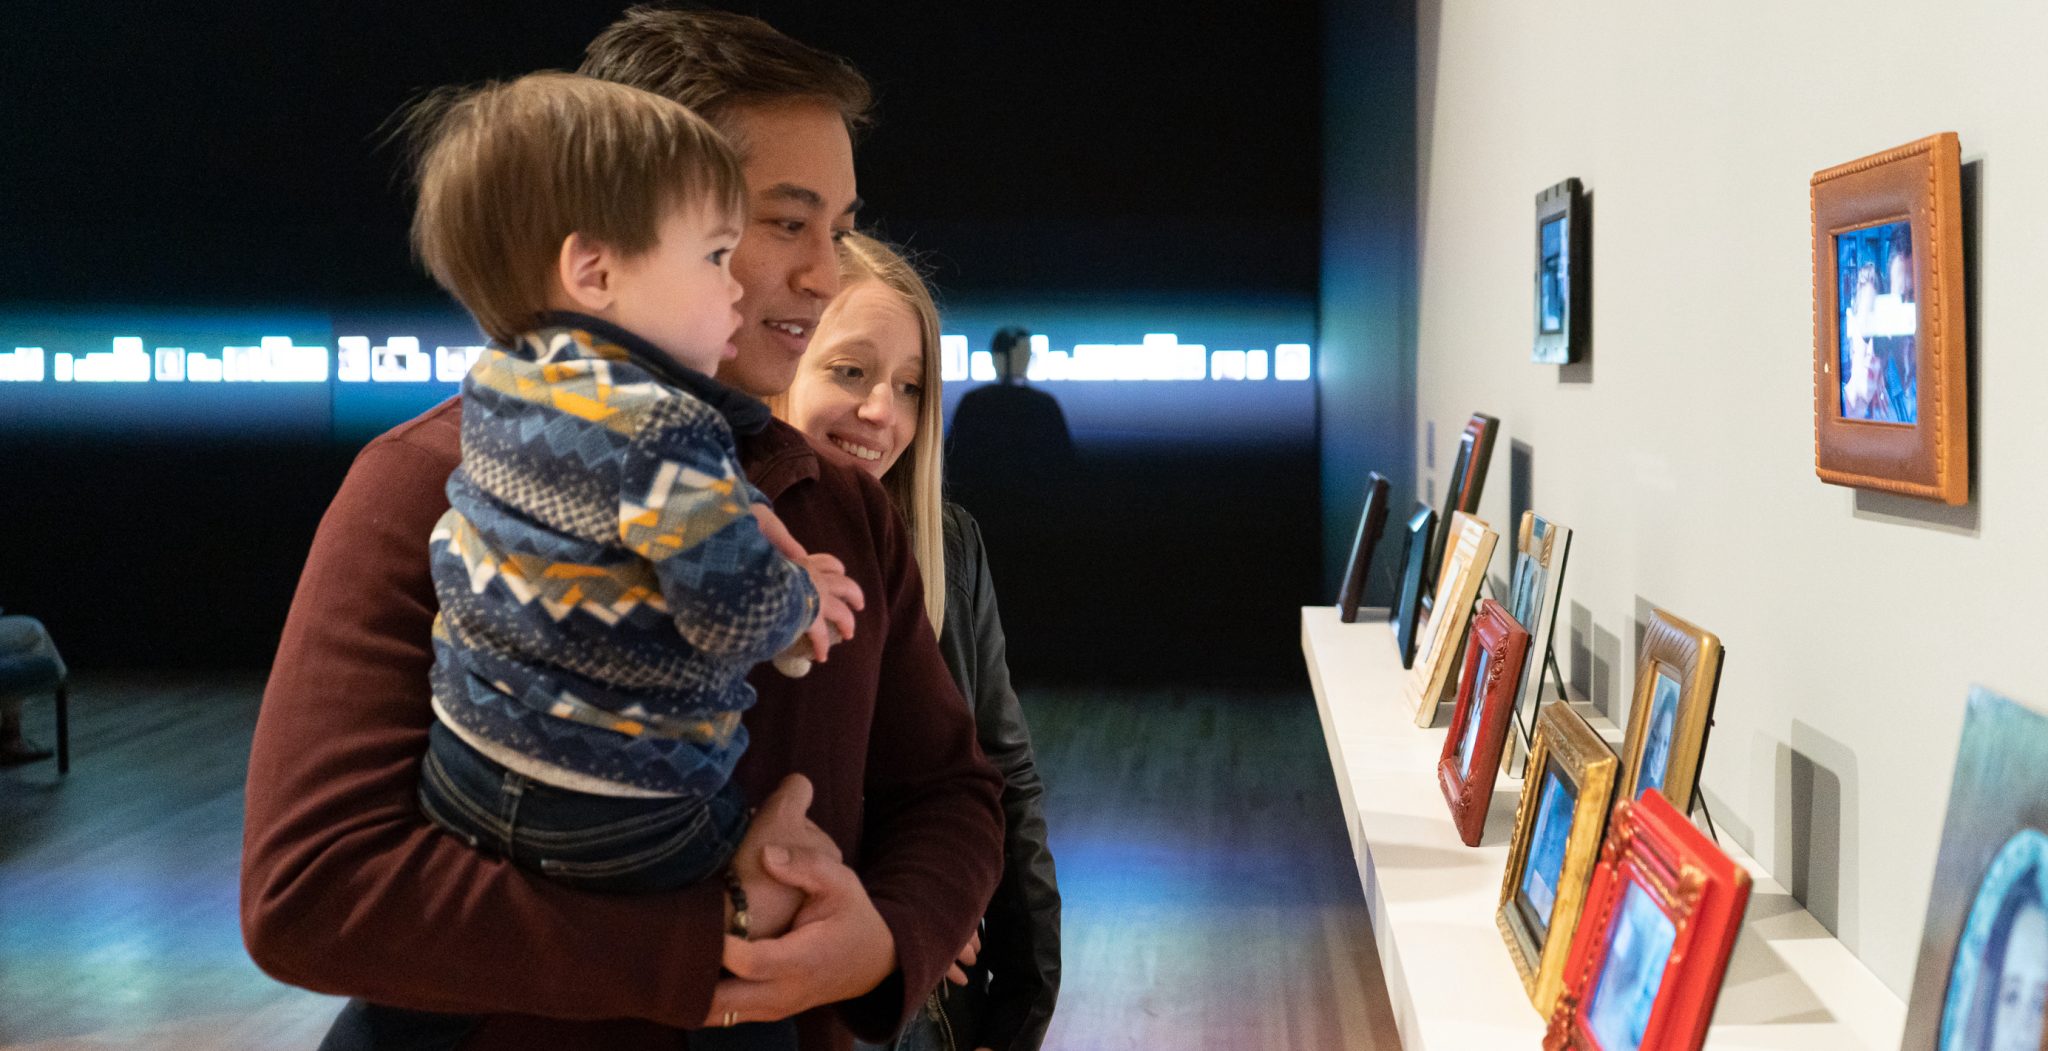 A family of three looking at some picture frames on a shelf inside an exhibition space